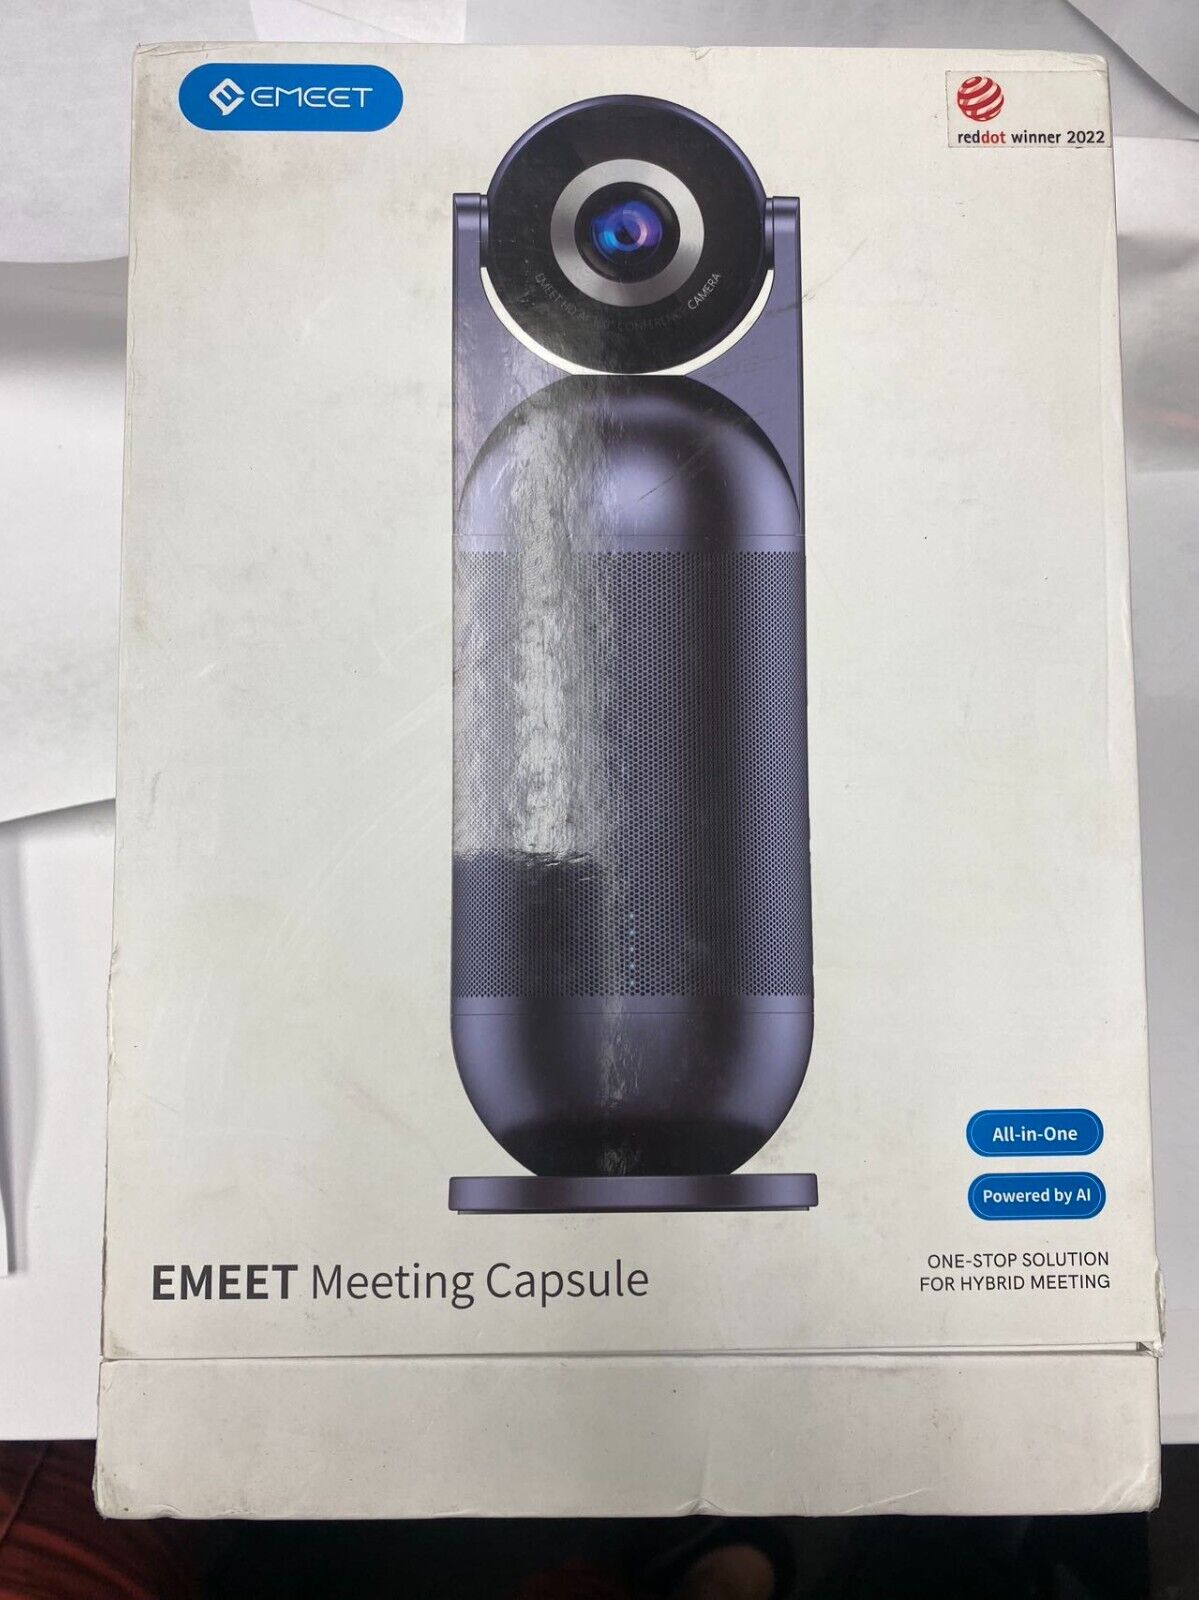 EMEET Meeting Capsule Captured 1080P Output 360°Video Conference Camera 8 Mic